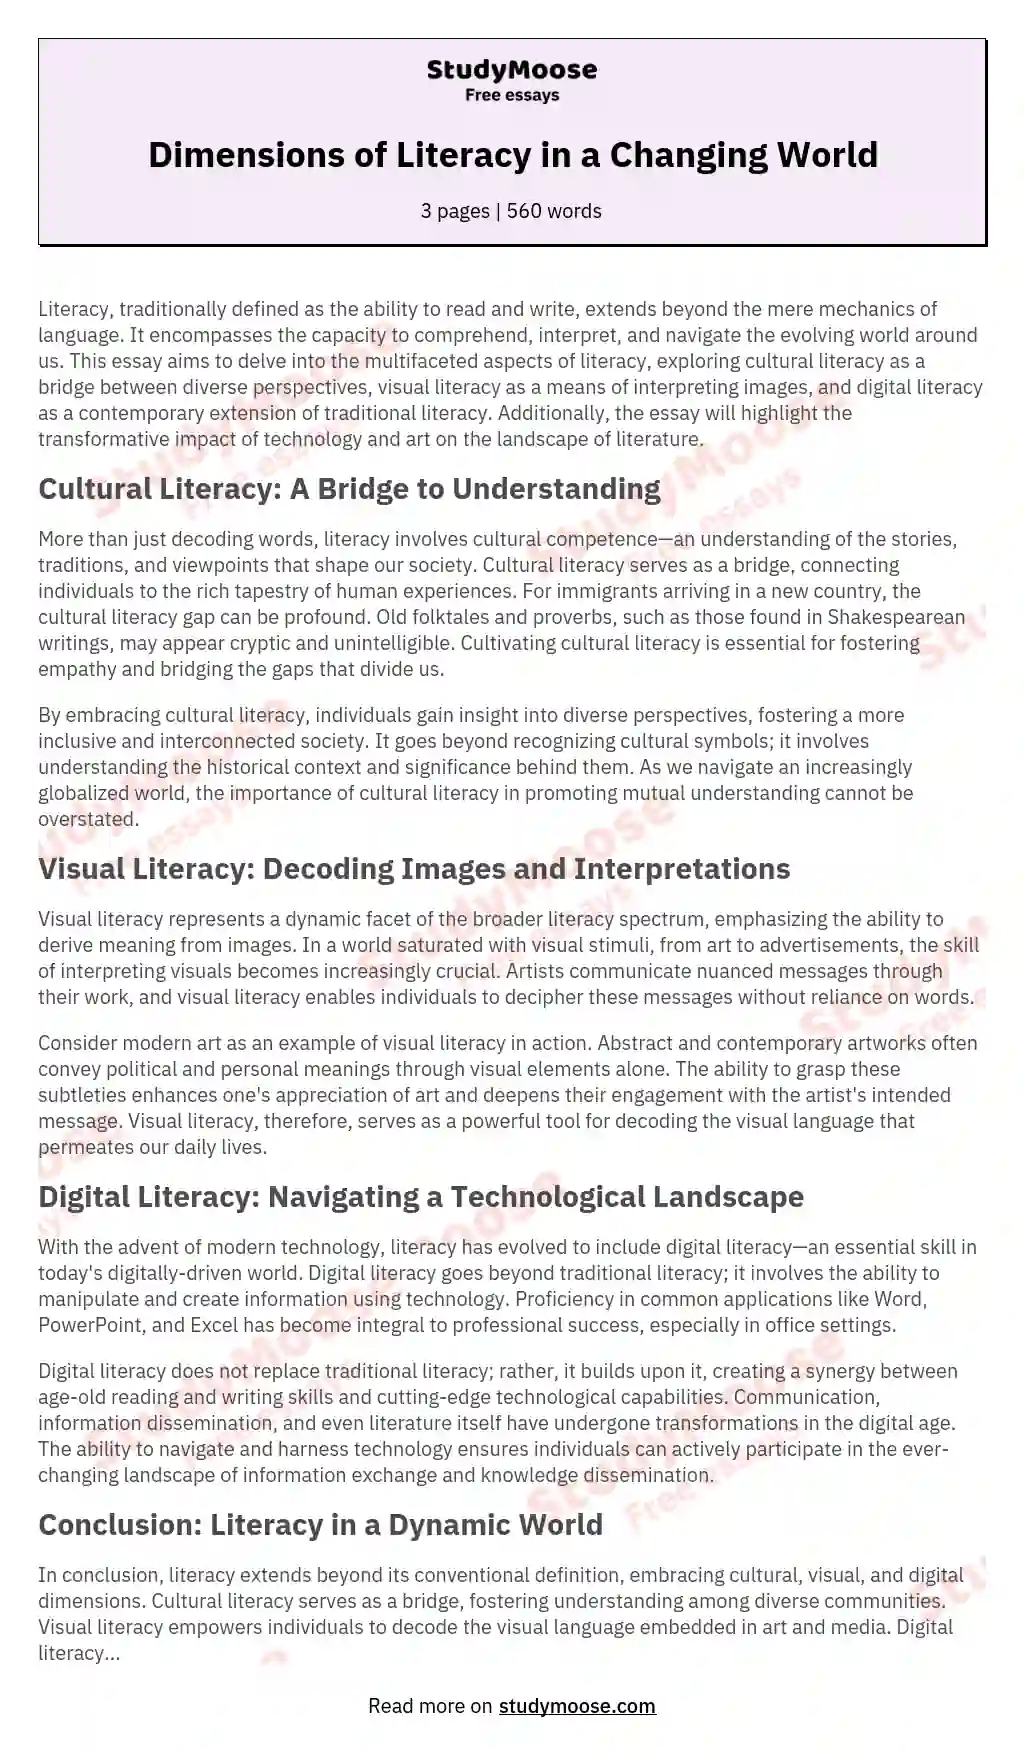 Dimensions of Literacy in a Changing World essay